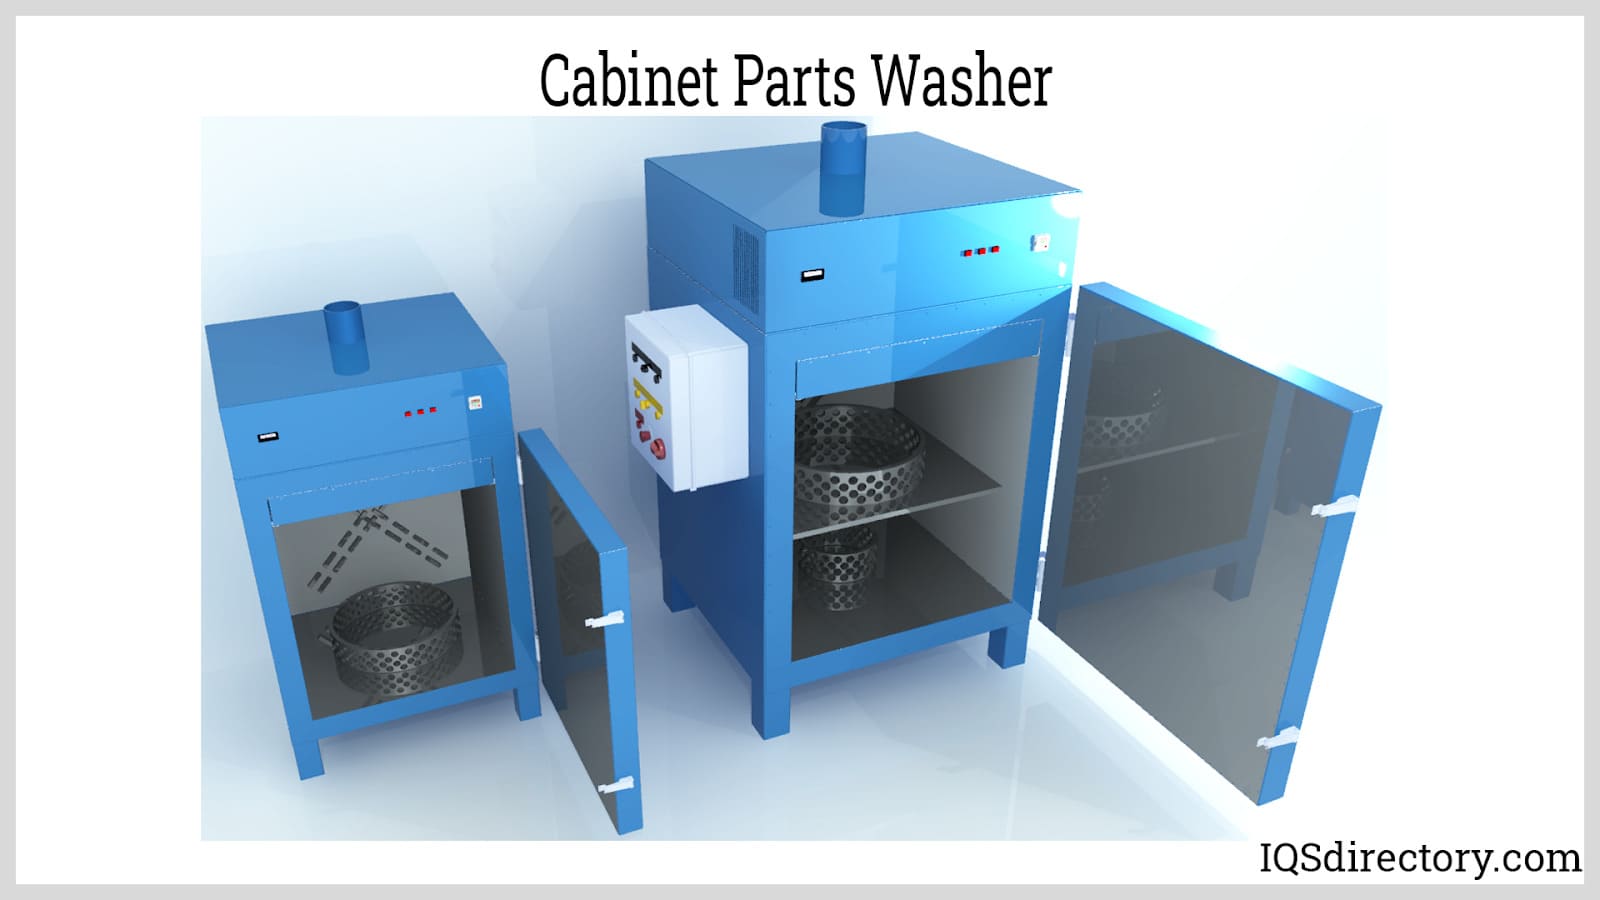 Cabinet Parts Washer